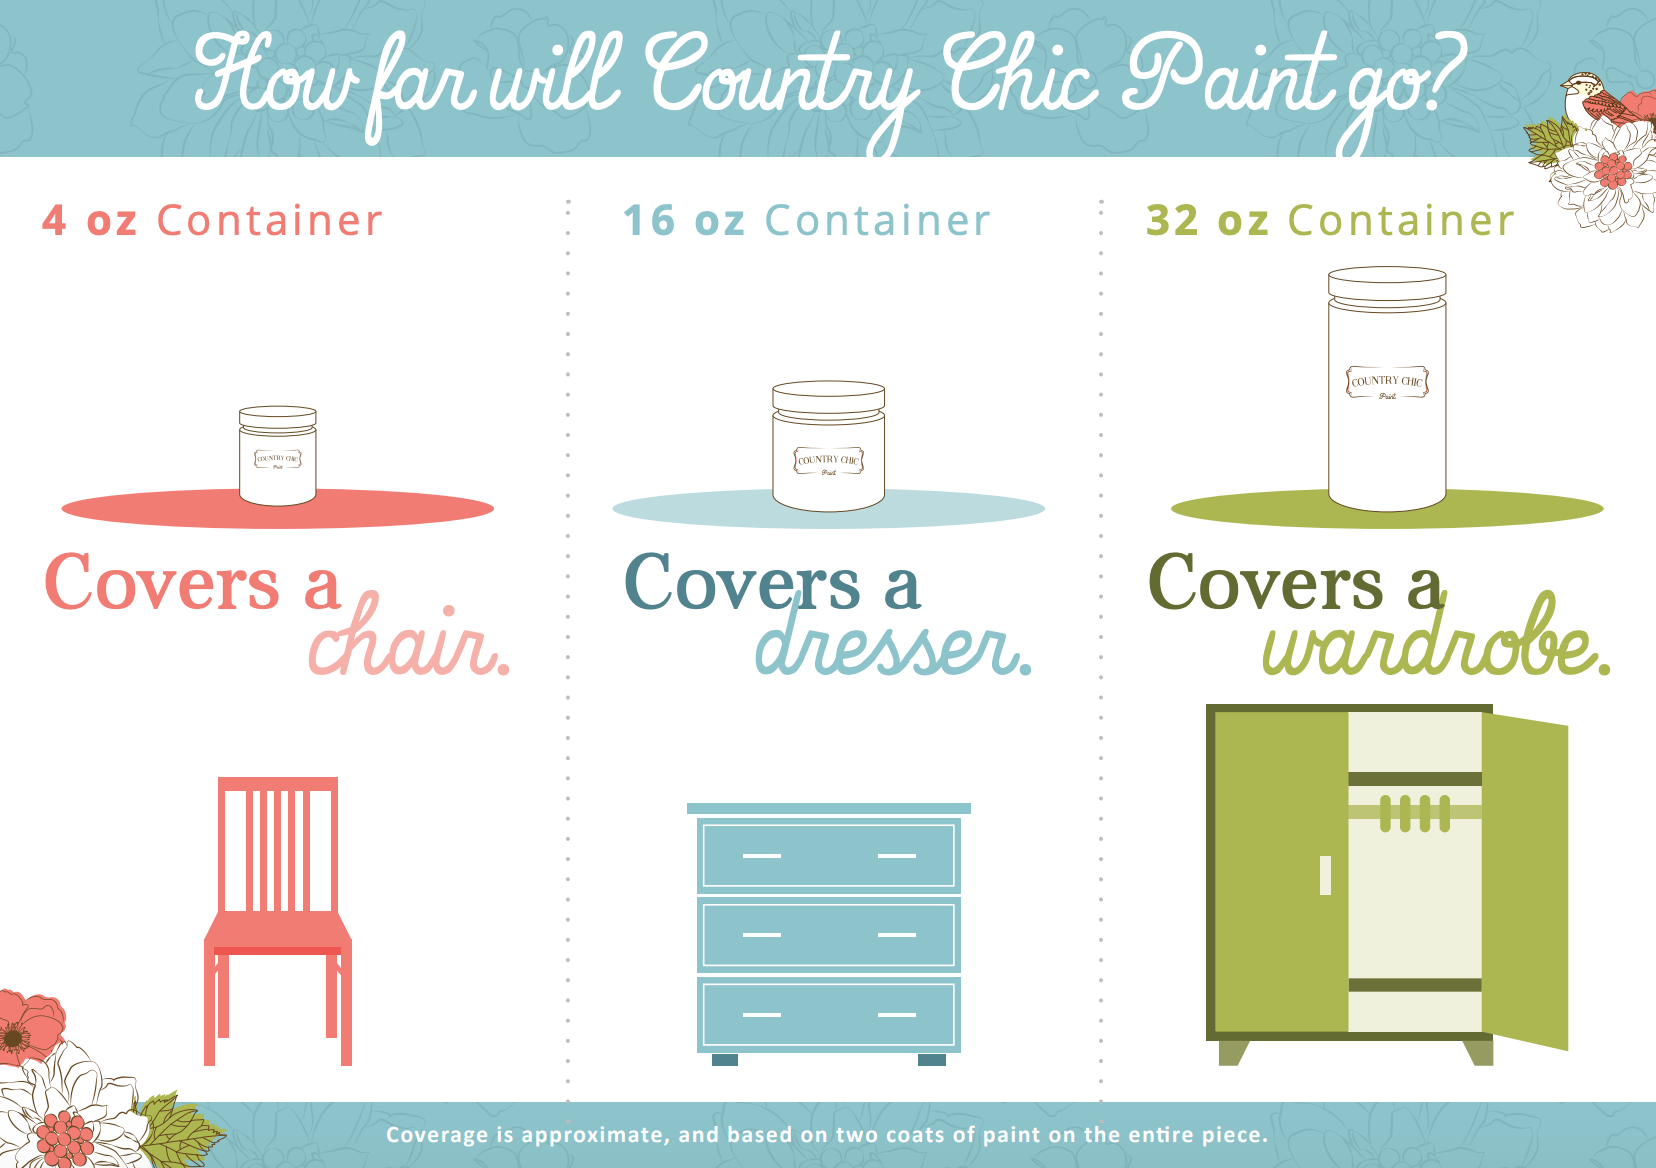 Country Chic Paint - I have to say, I think Cait made the perfect